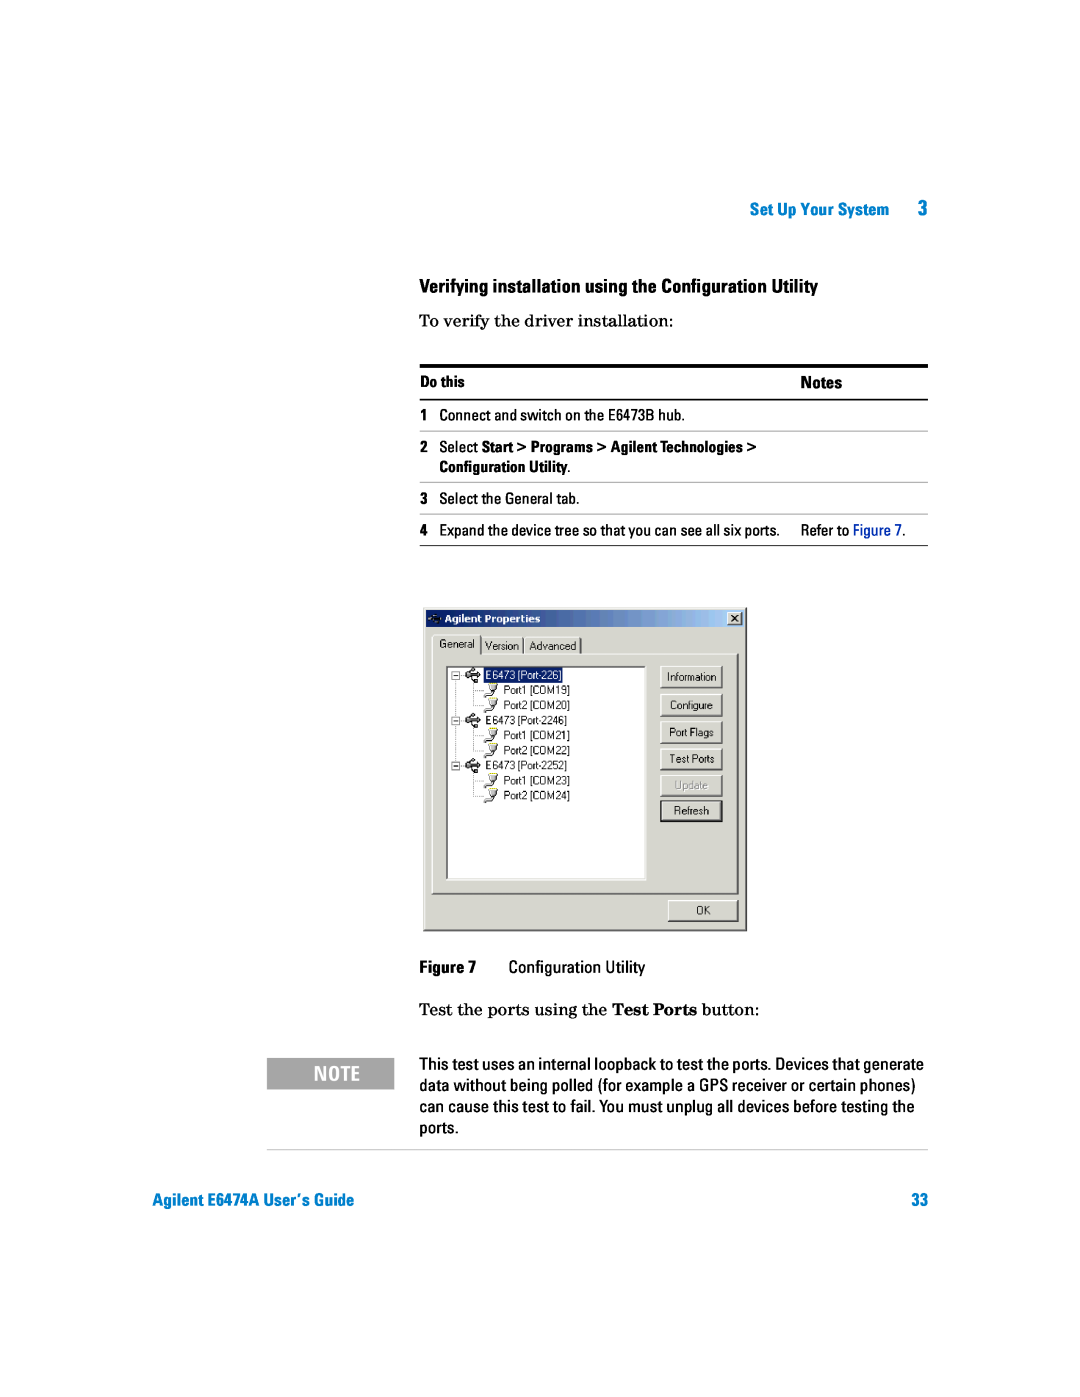 Agilent Technologies Agilent E6474A manual Verifying installation using the Configuration Utility, Set Up Your System 